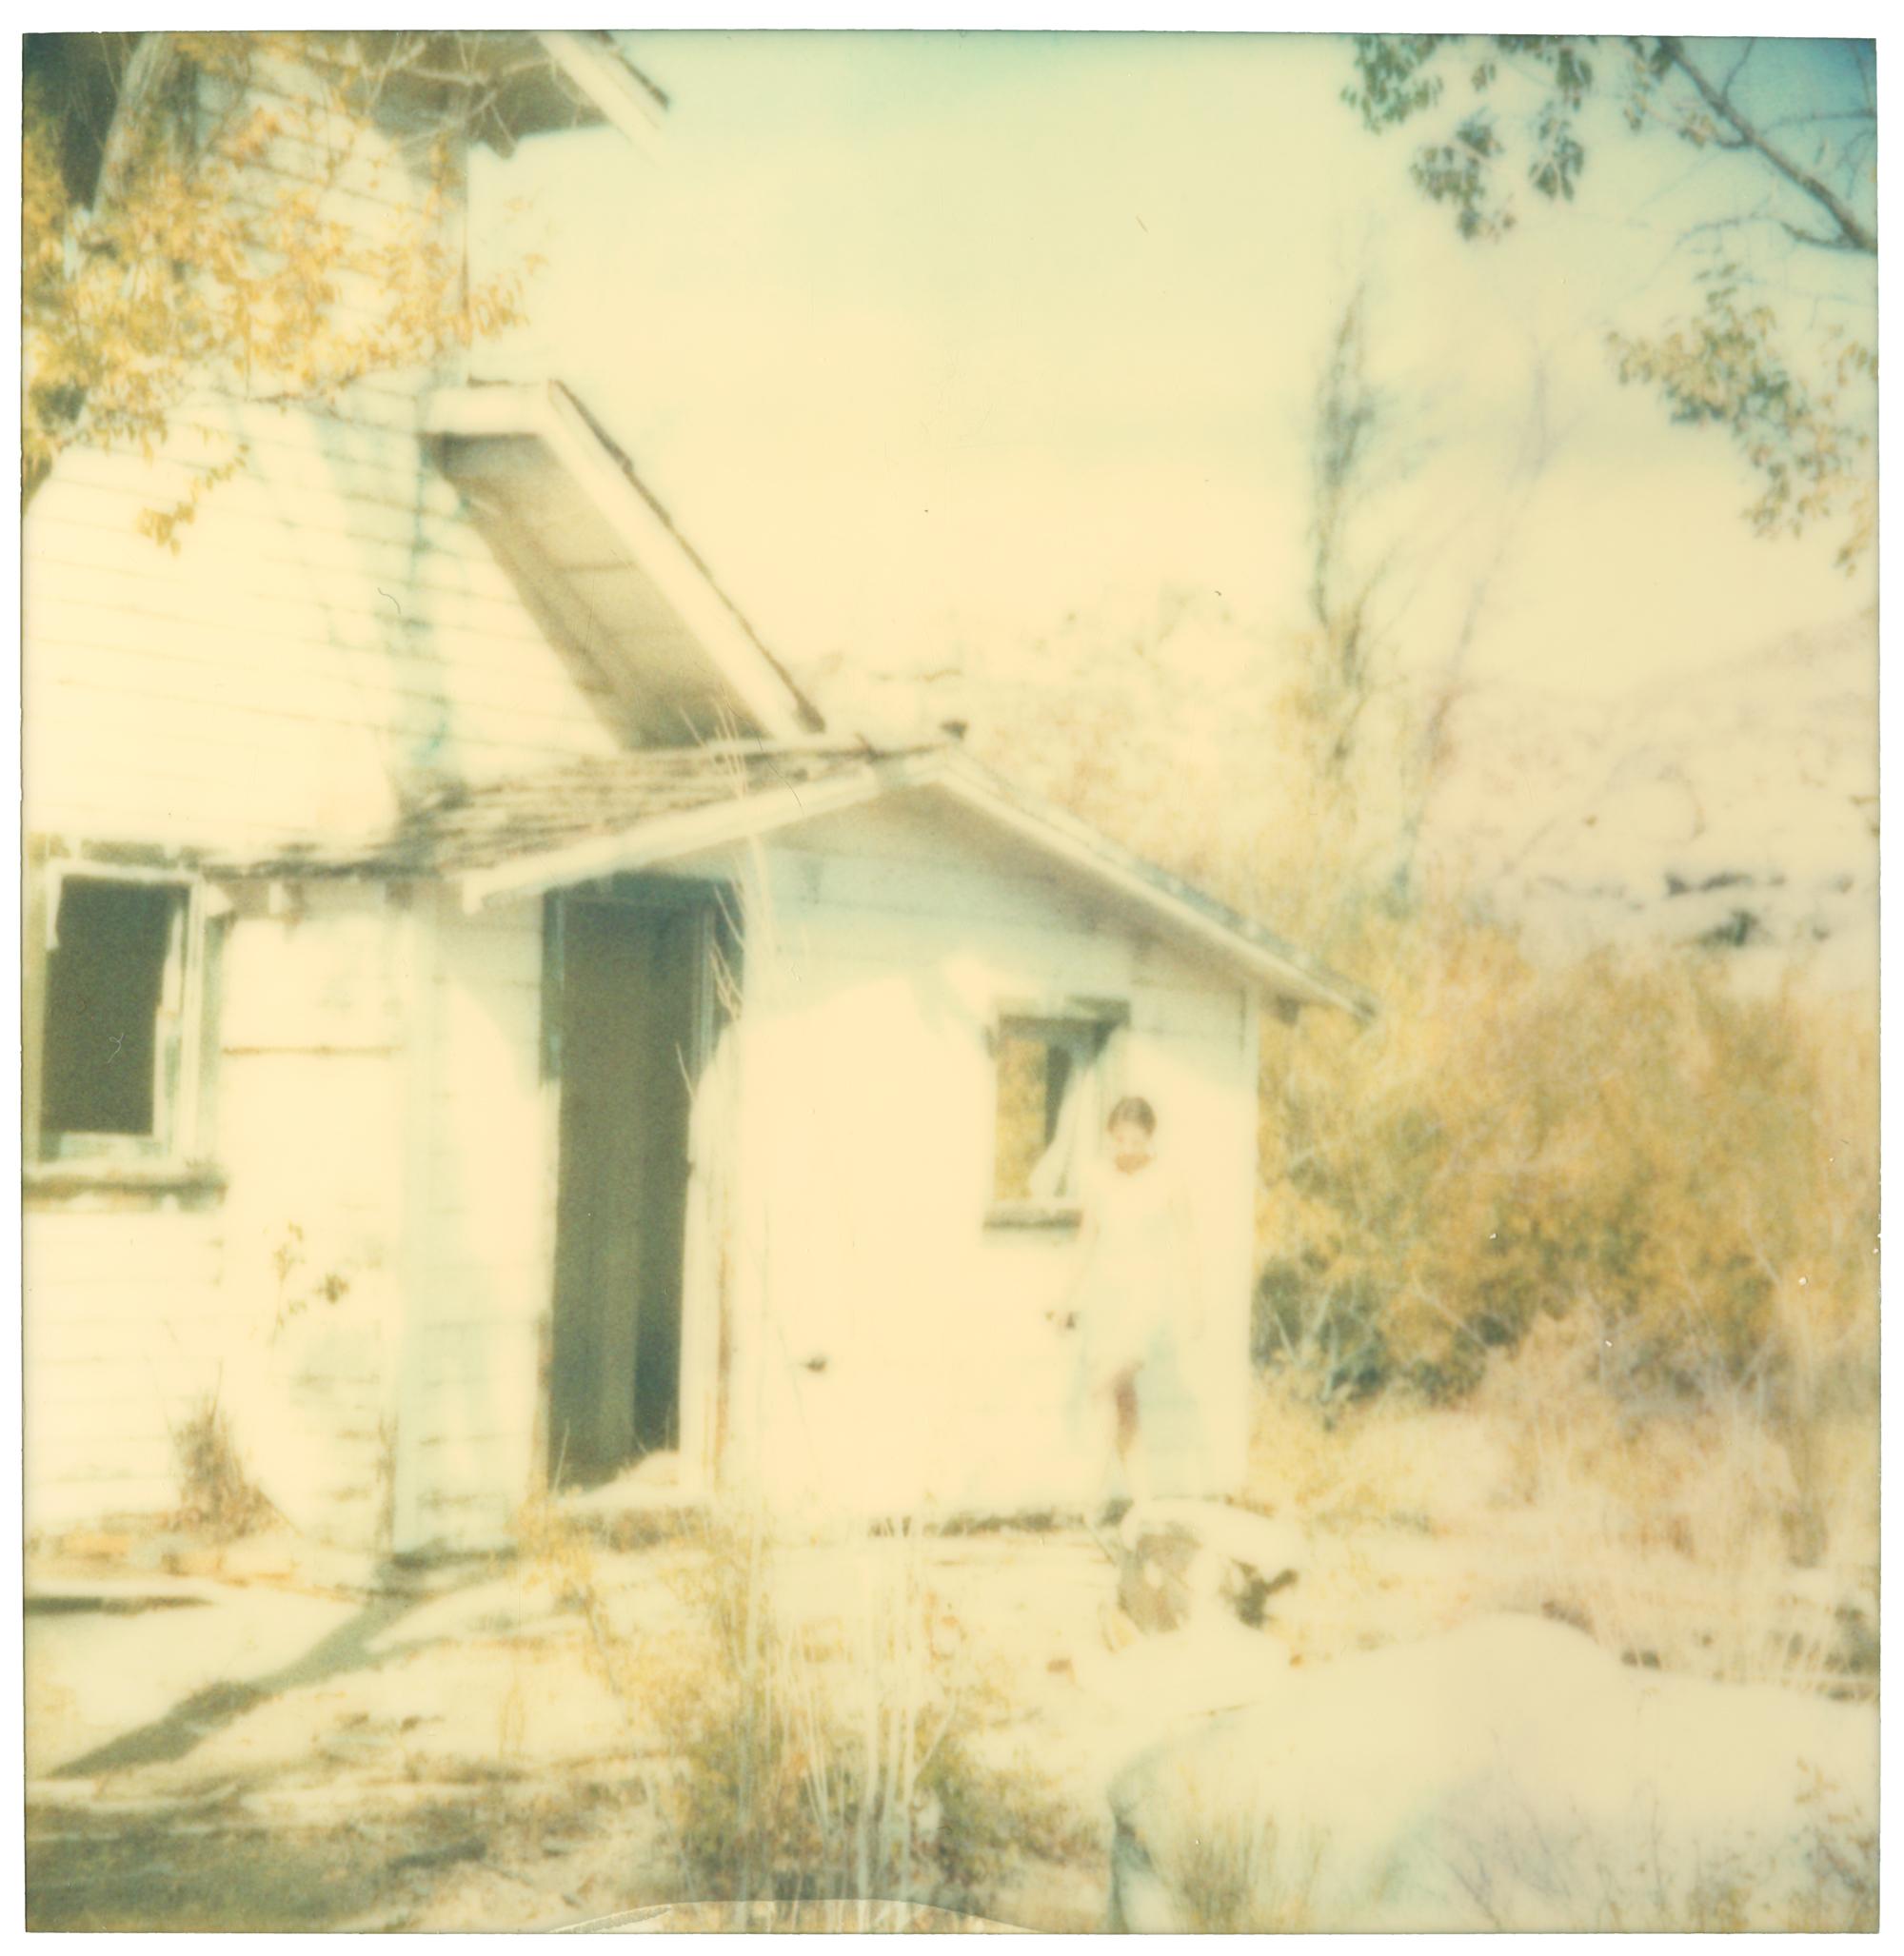 Last Season (Wastelands), diptych - Polaroid, Expired. Contemporary, Color - Beige Color Photograph by Stefanie Schneider